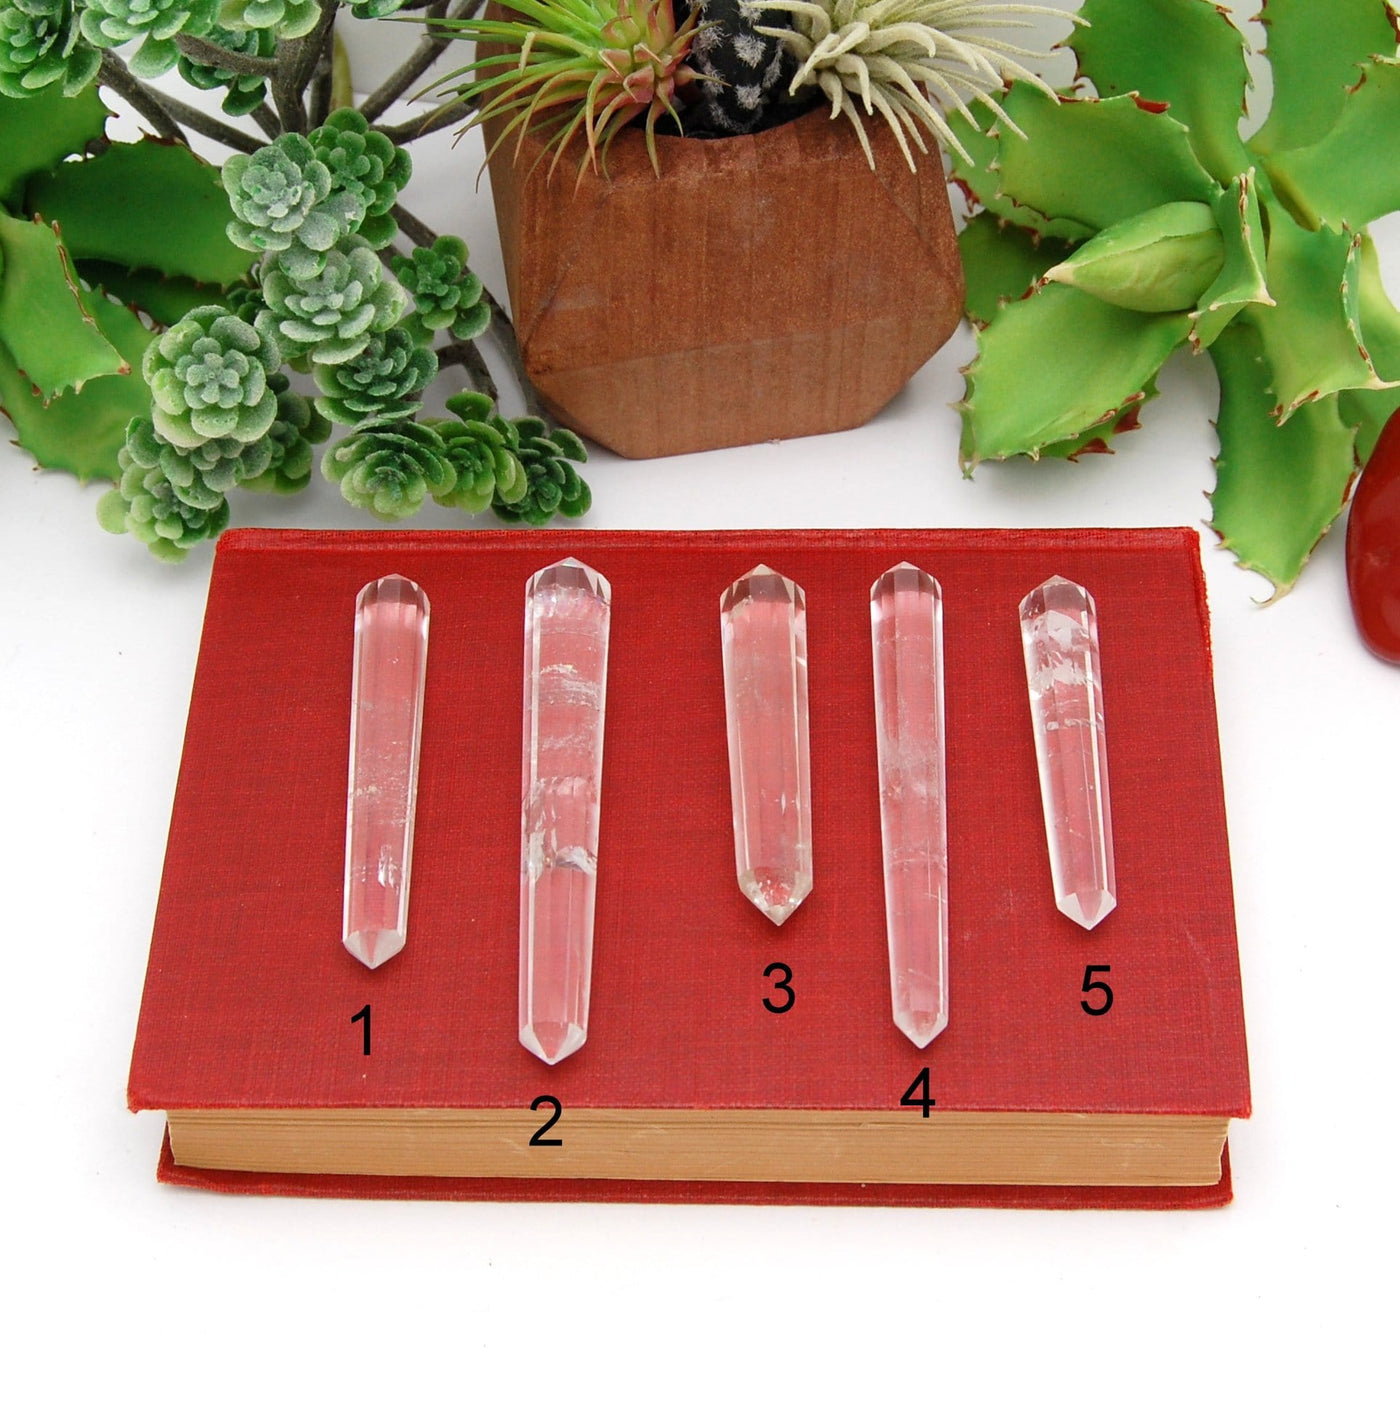 5 Double Terminated Crystal Quartz Points Different Size on Red Book Background. 